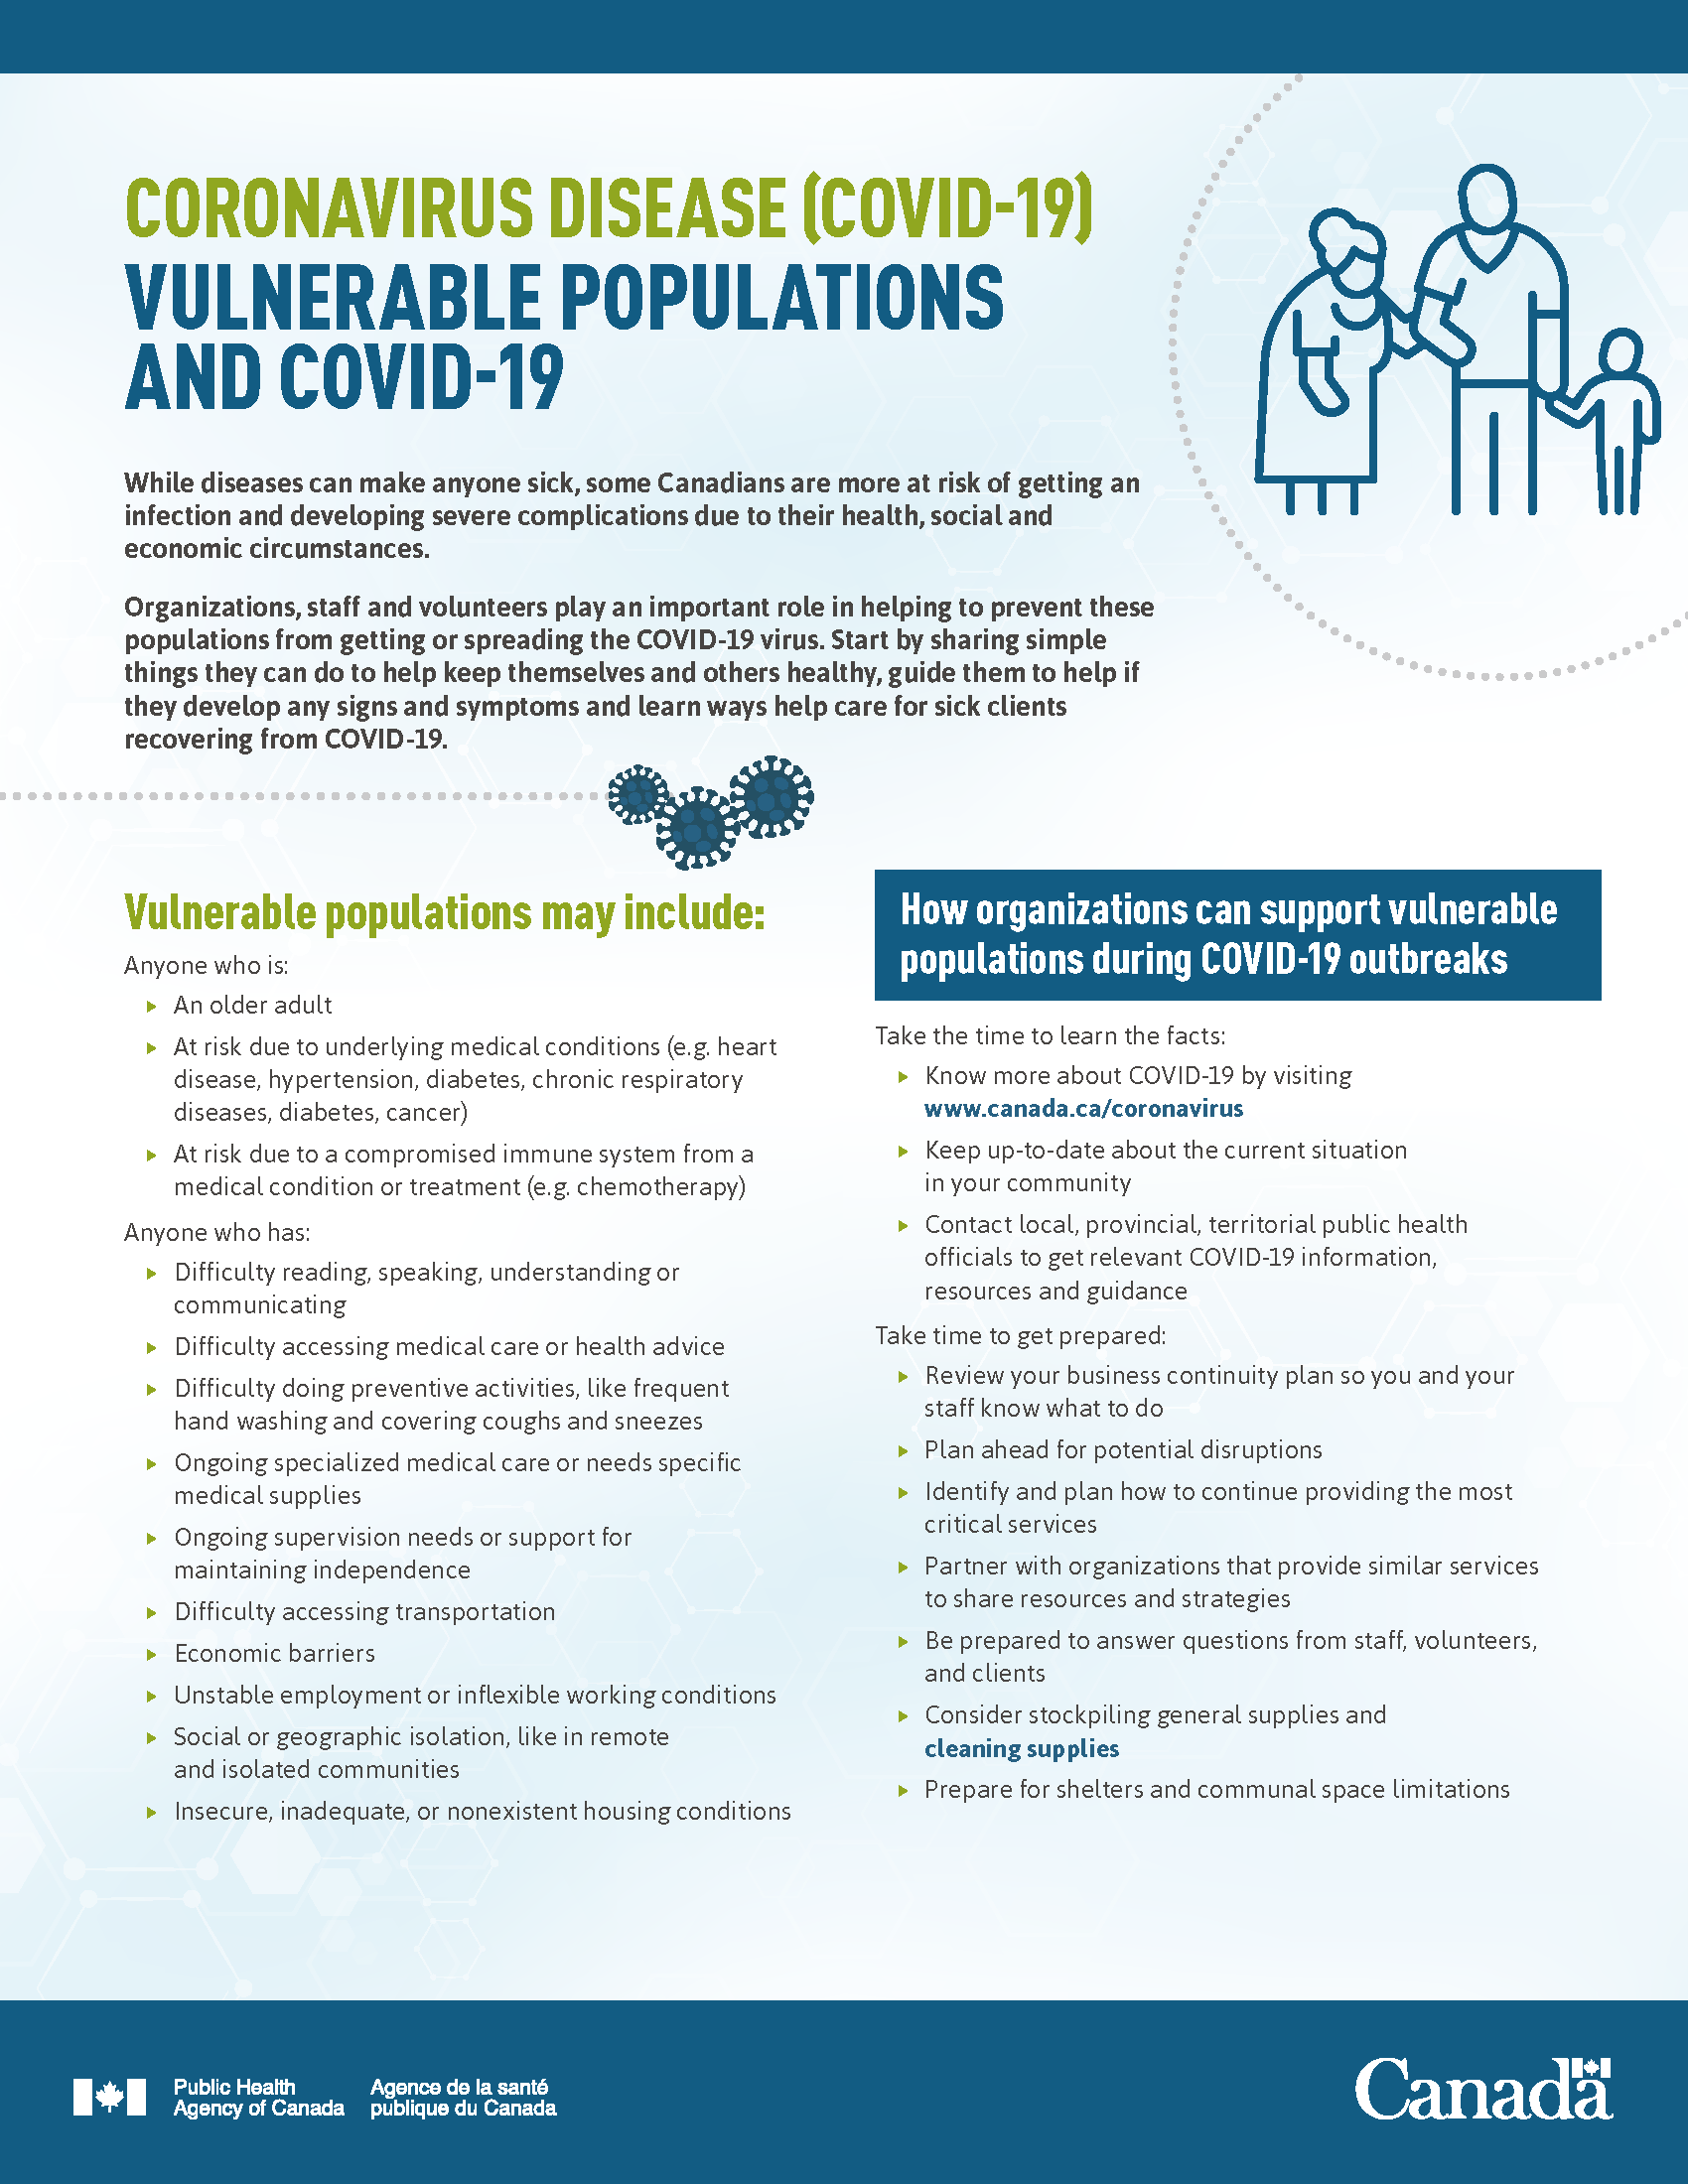 20200313_VULNERABLE_POPULATIONS_AND_COVID-19_1.png